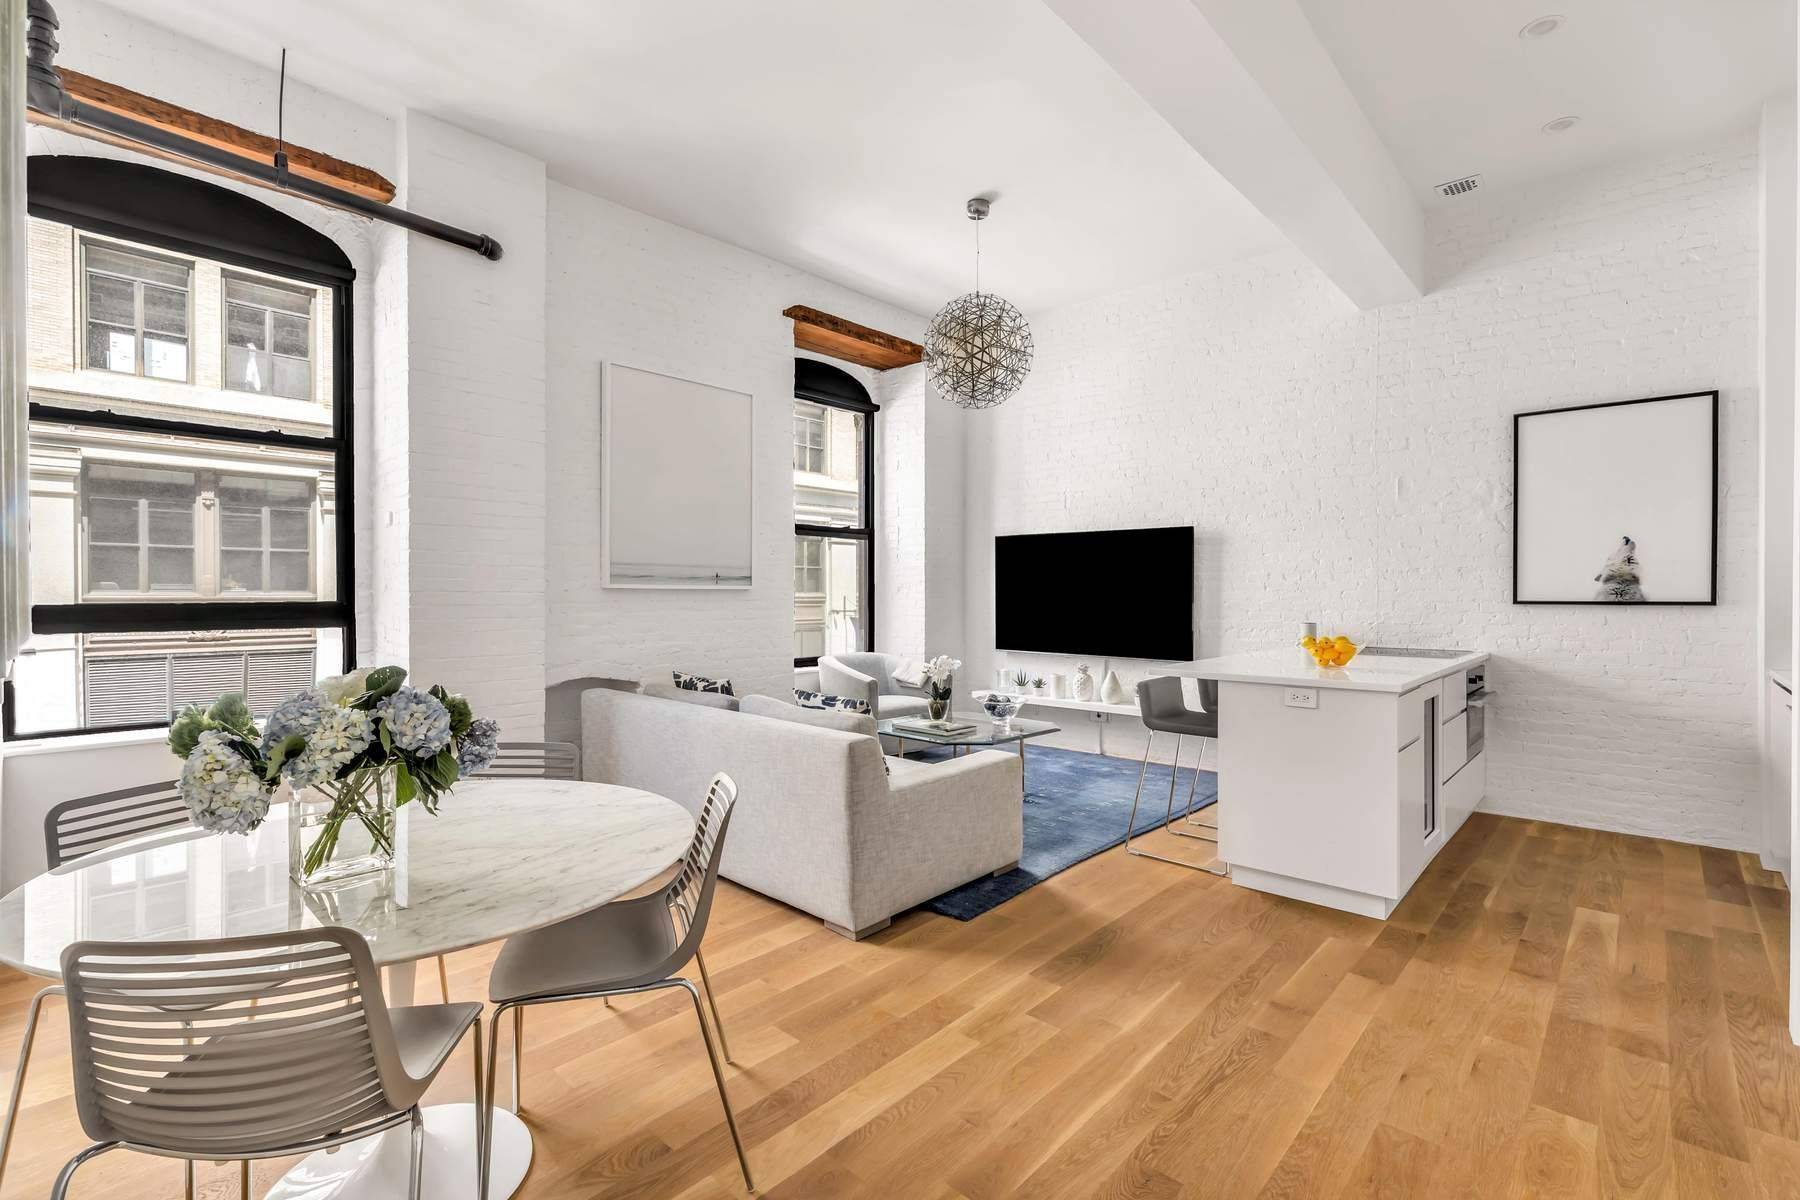 Triple Mint Greenwich Village One Bedroom with Soaring Ceilings Located in one of the most sought after neighborhoods, this pre war, one bedroom coop is fully renovated and sun filled ...